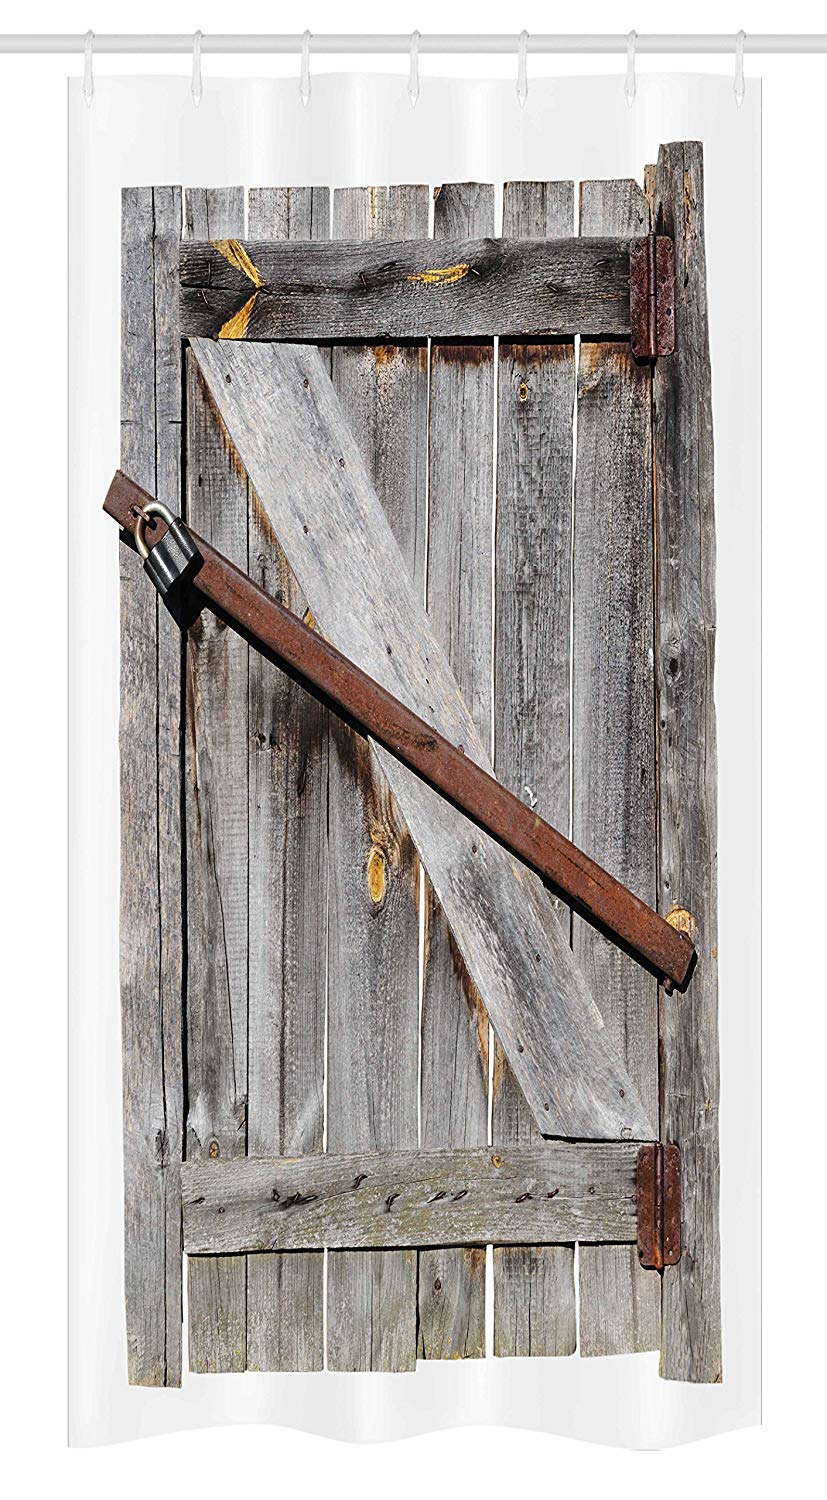 Ambesonne Rustic Stall Shower Curtain, Aged Wood Barn Door with Rusty Crossed Locks Abandoned Ancient Western Farmhouse Design, Fabric Bathroom Decor Set with Hooks, 36 W x 72 L Inches, Brown